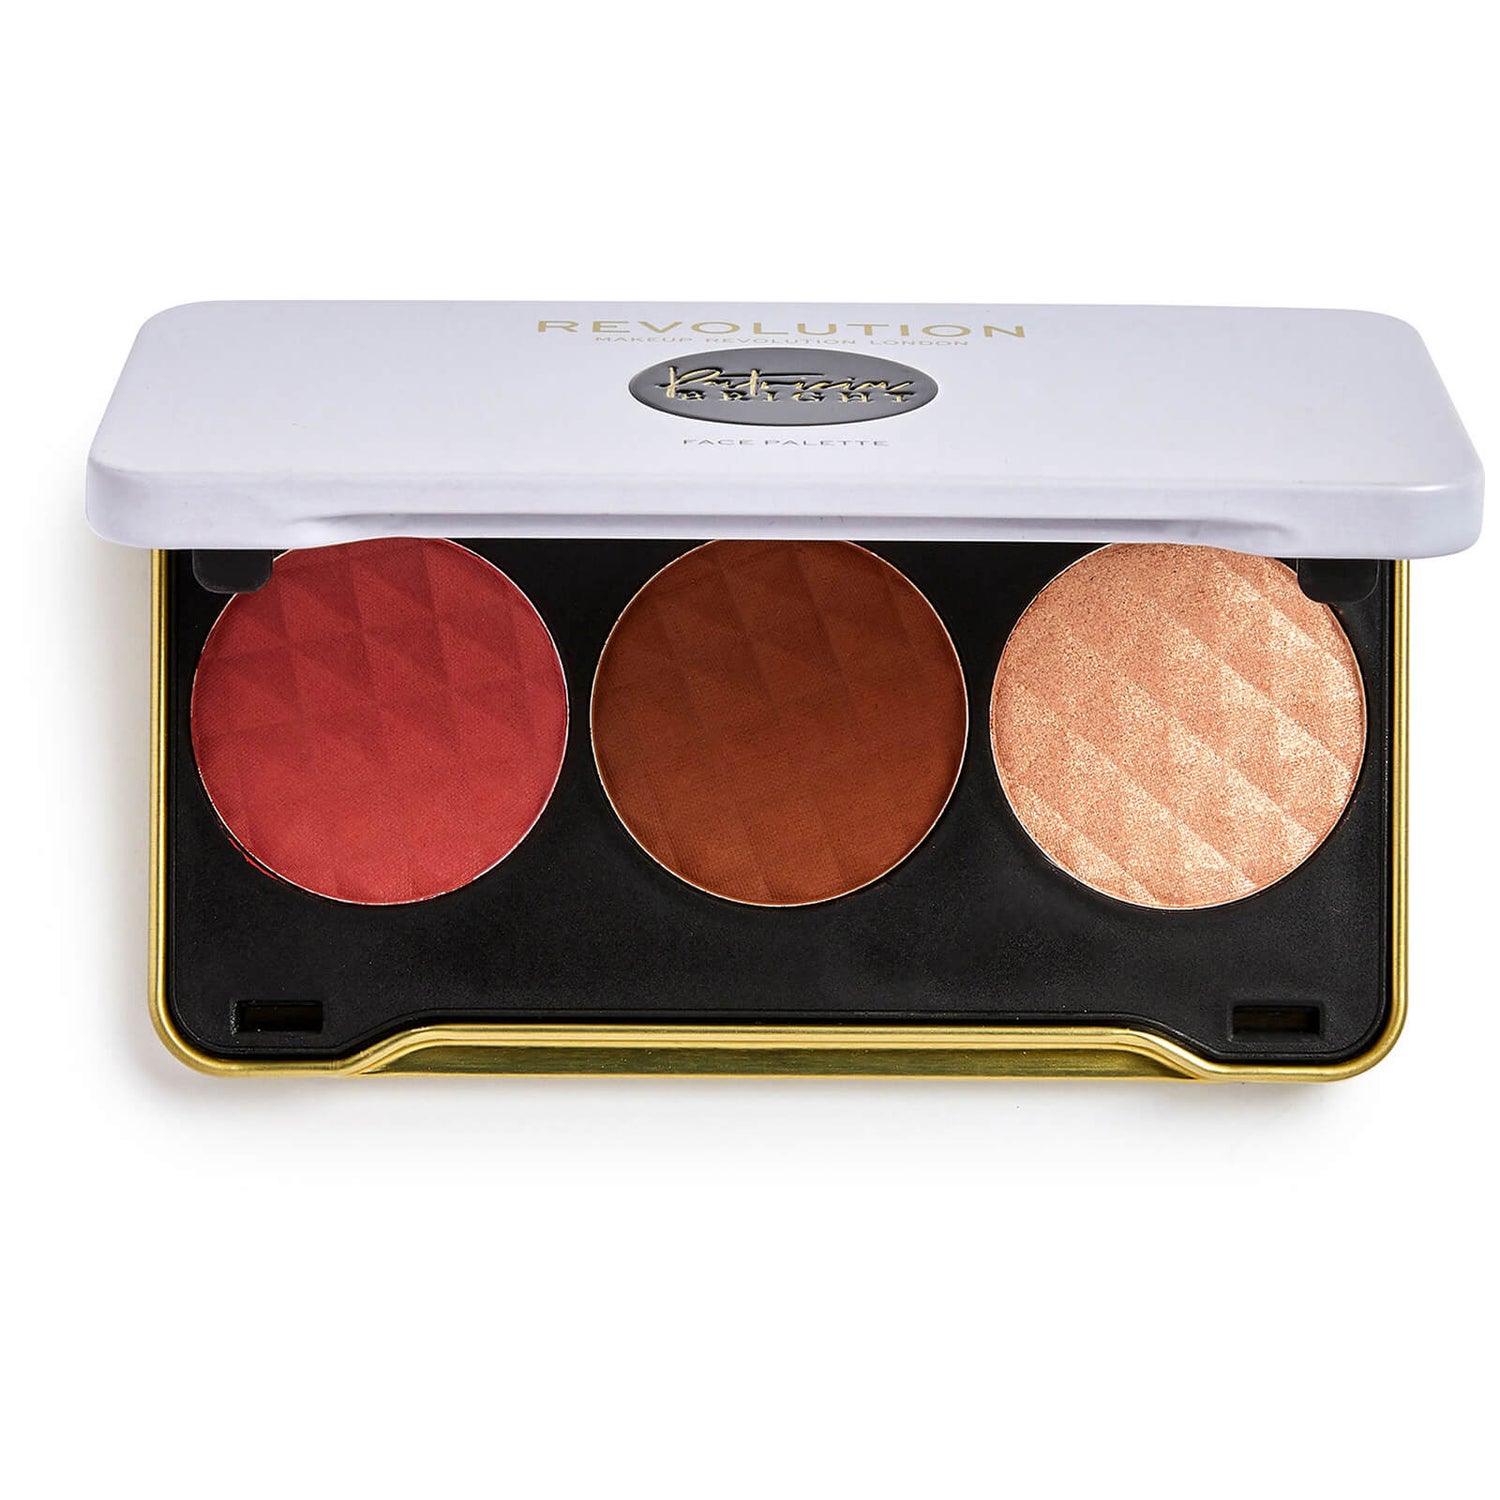 Makeup Revolution x Patricia Bright You Are Gold Face Palette